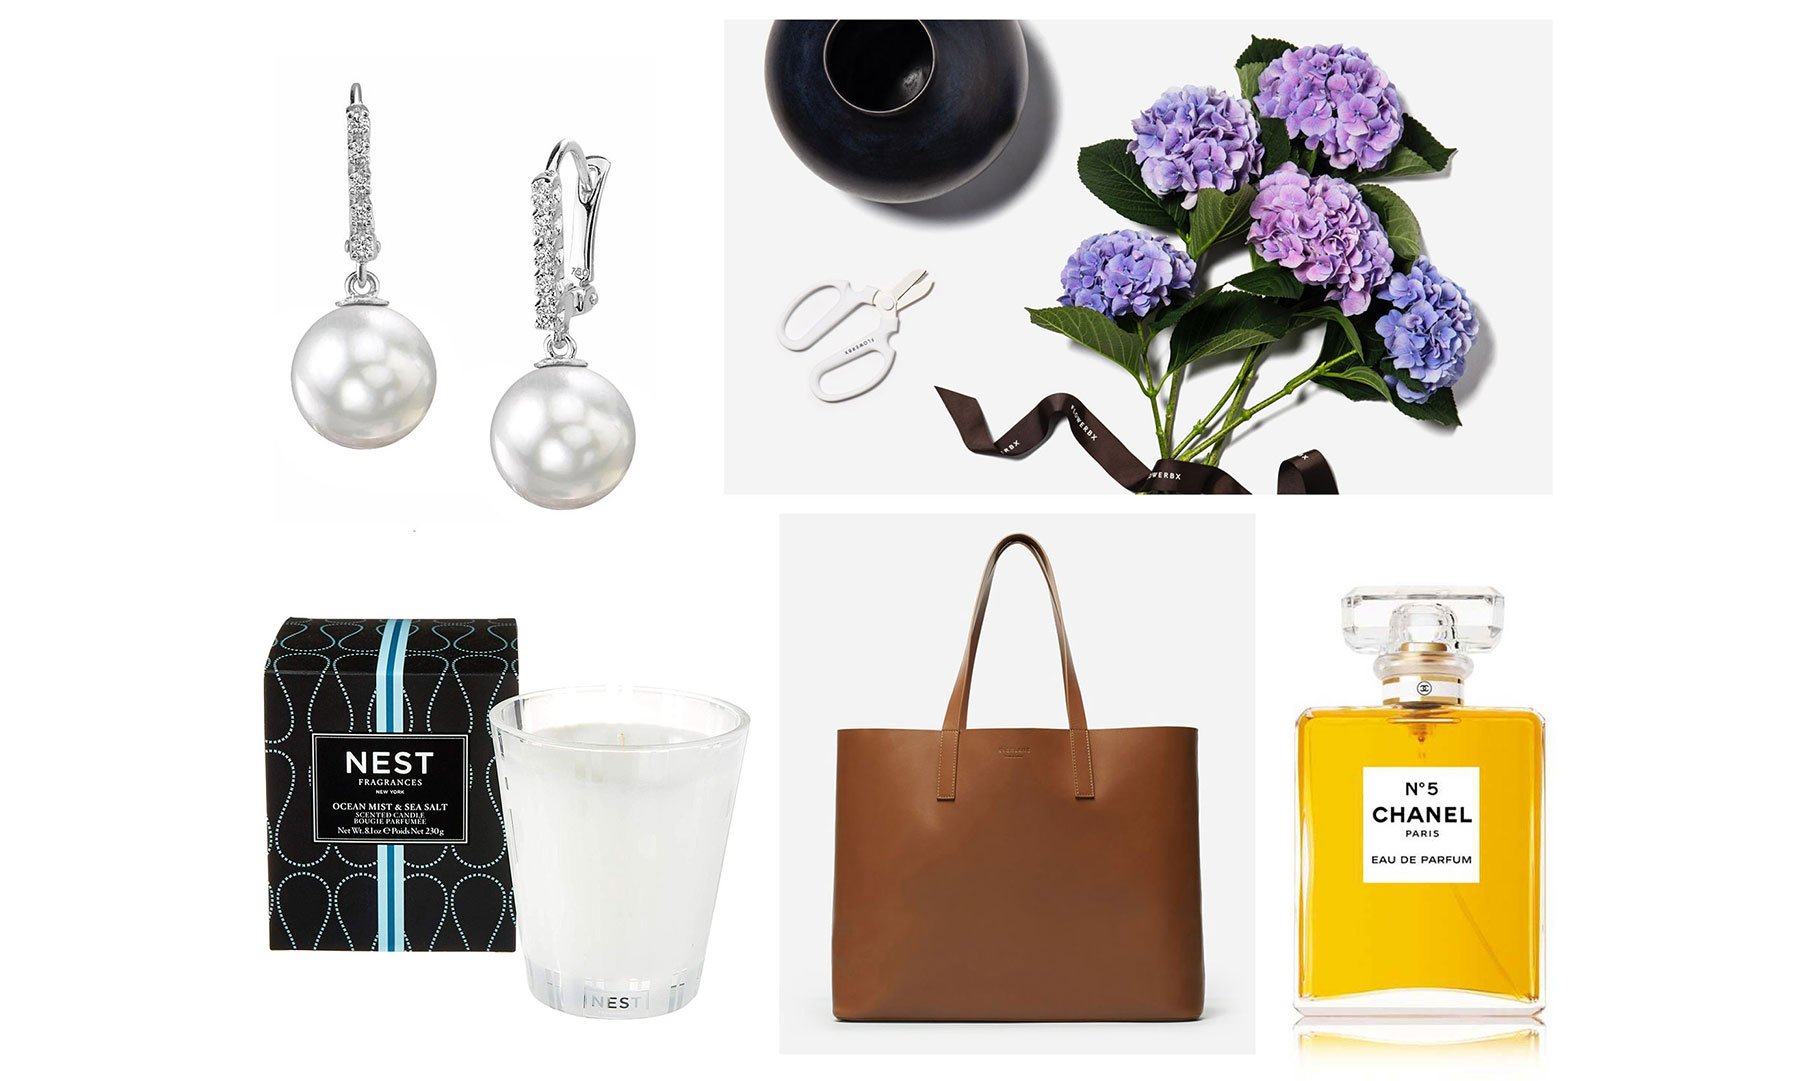 Sentimental gift ideas for moms - Beauty Through Imperfection